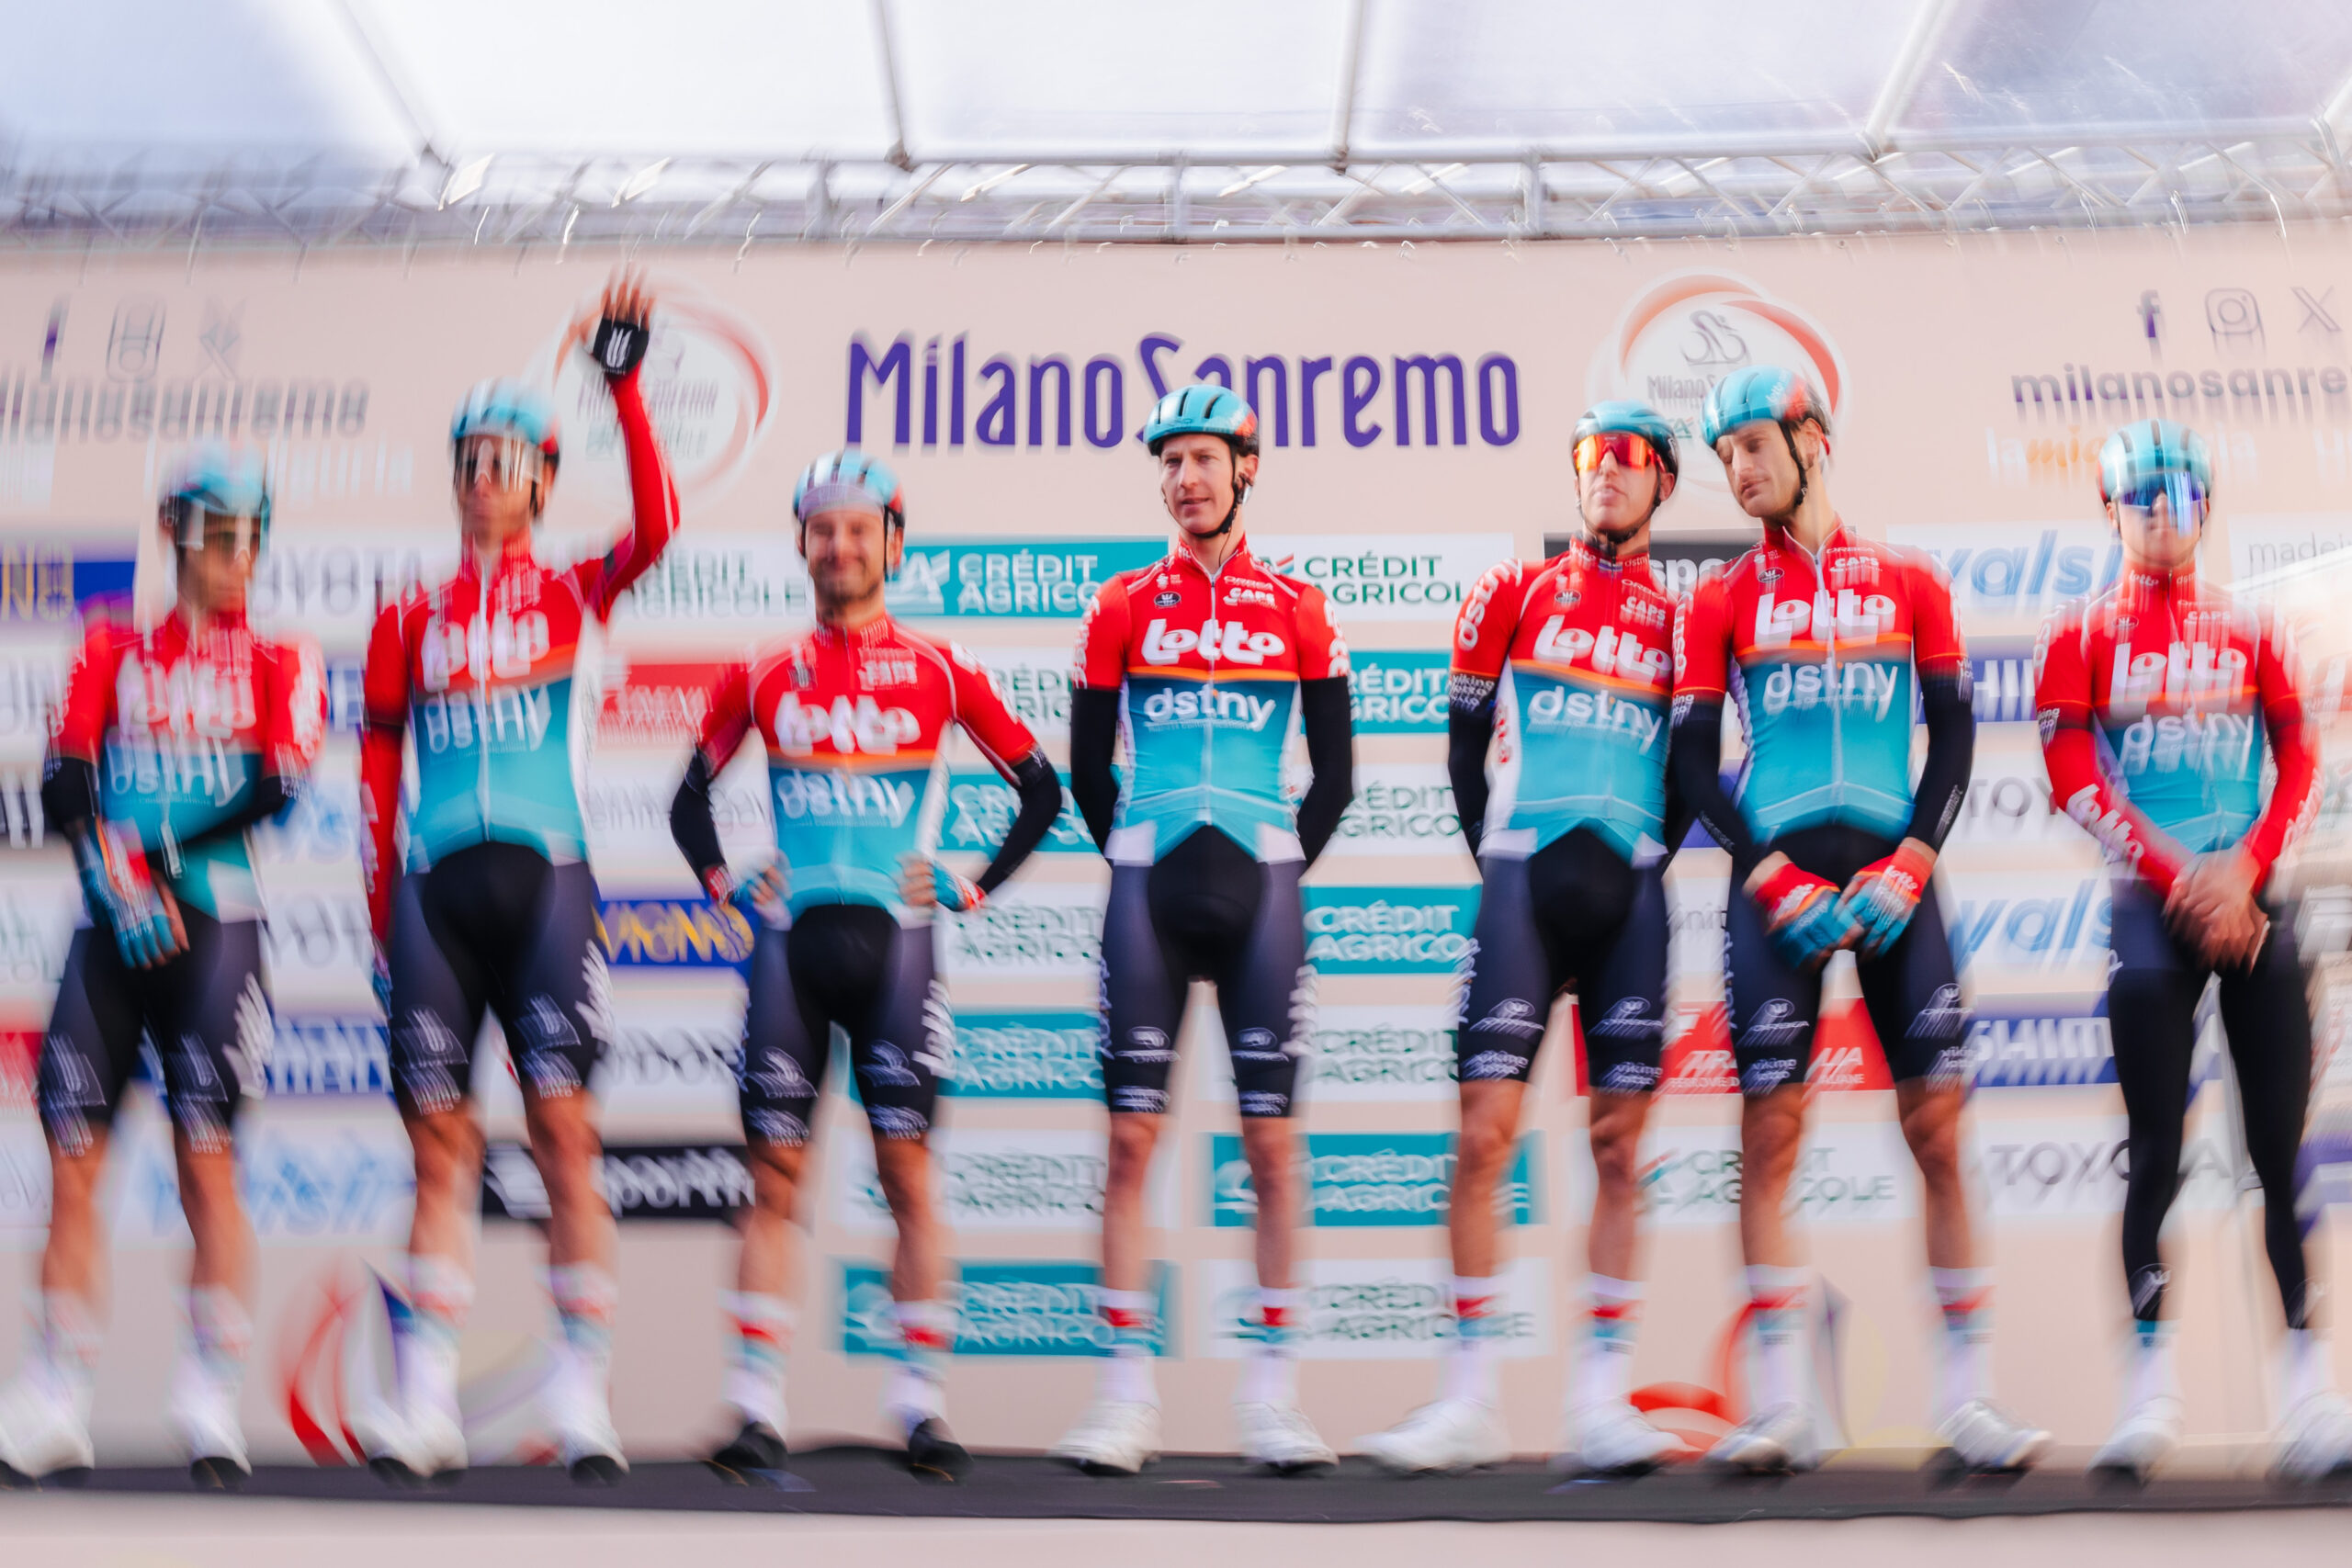 Lotto-Dstny bids farewell to Italy after an excellent performance in Milano-Sanremo.